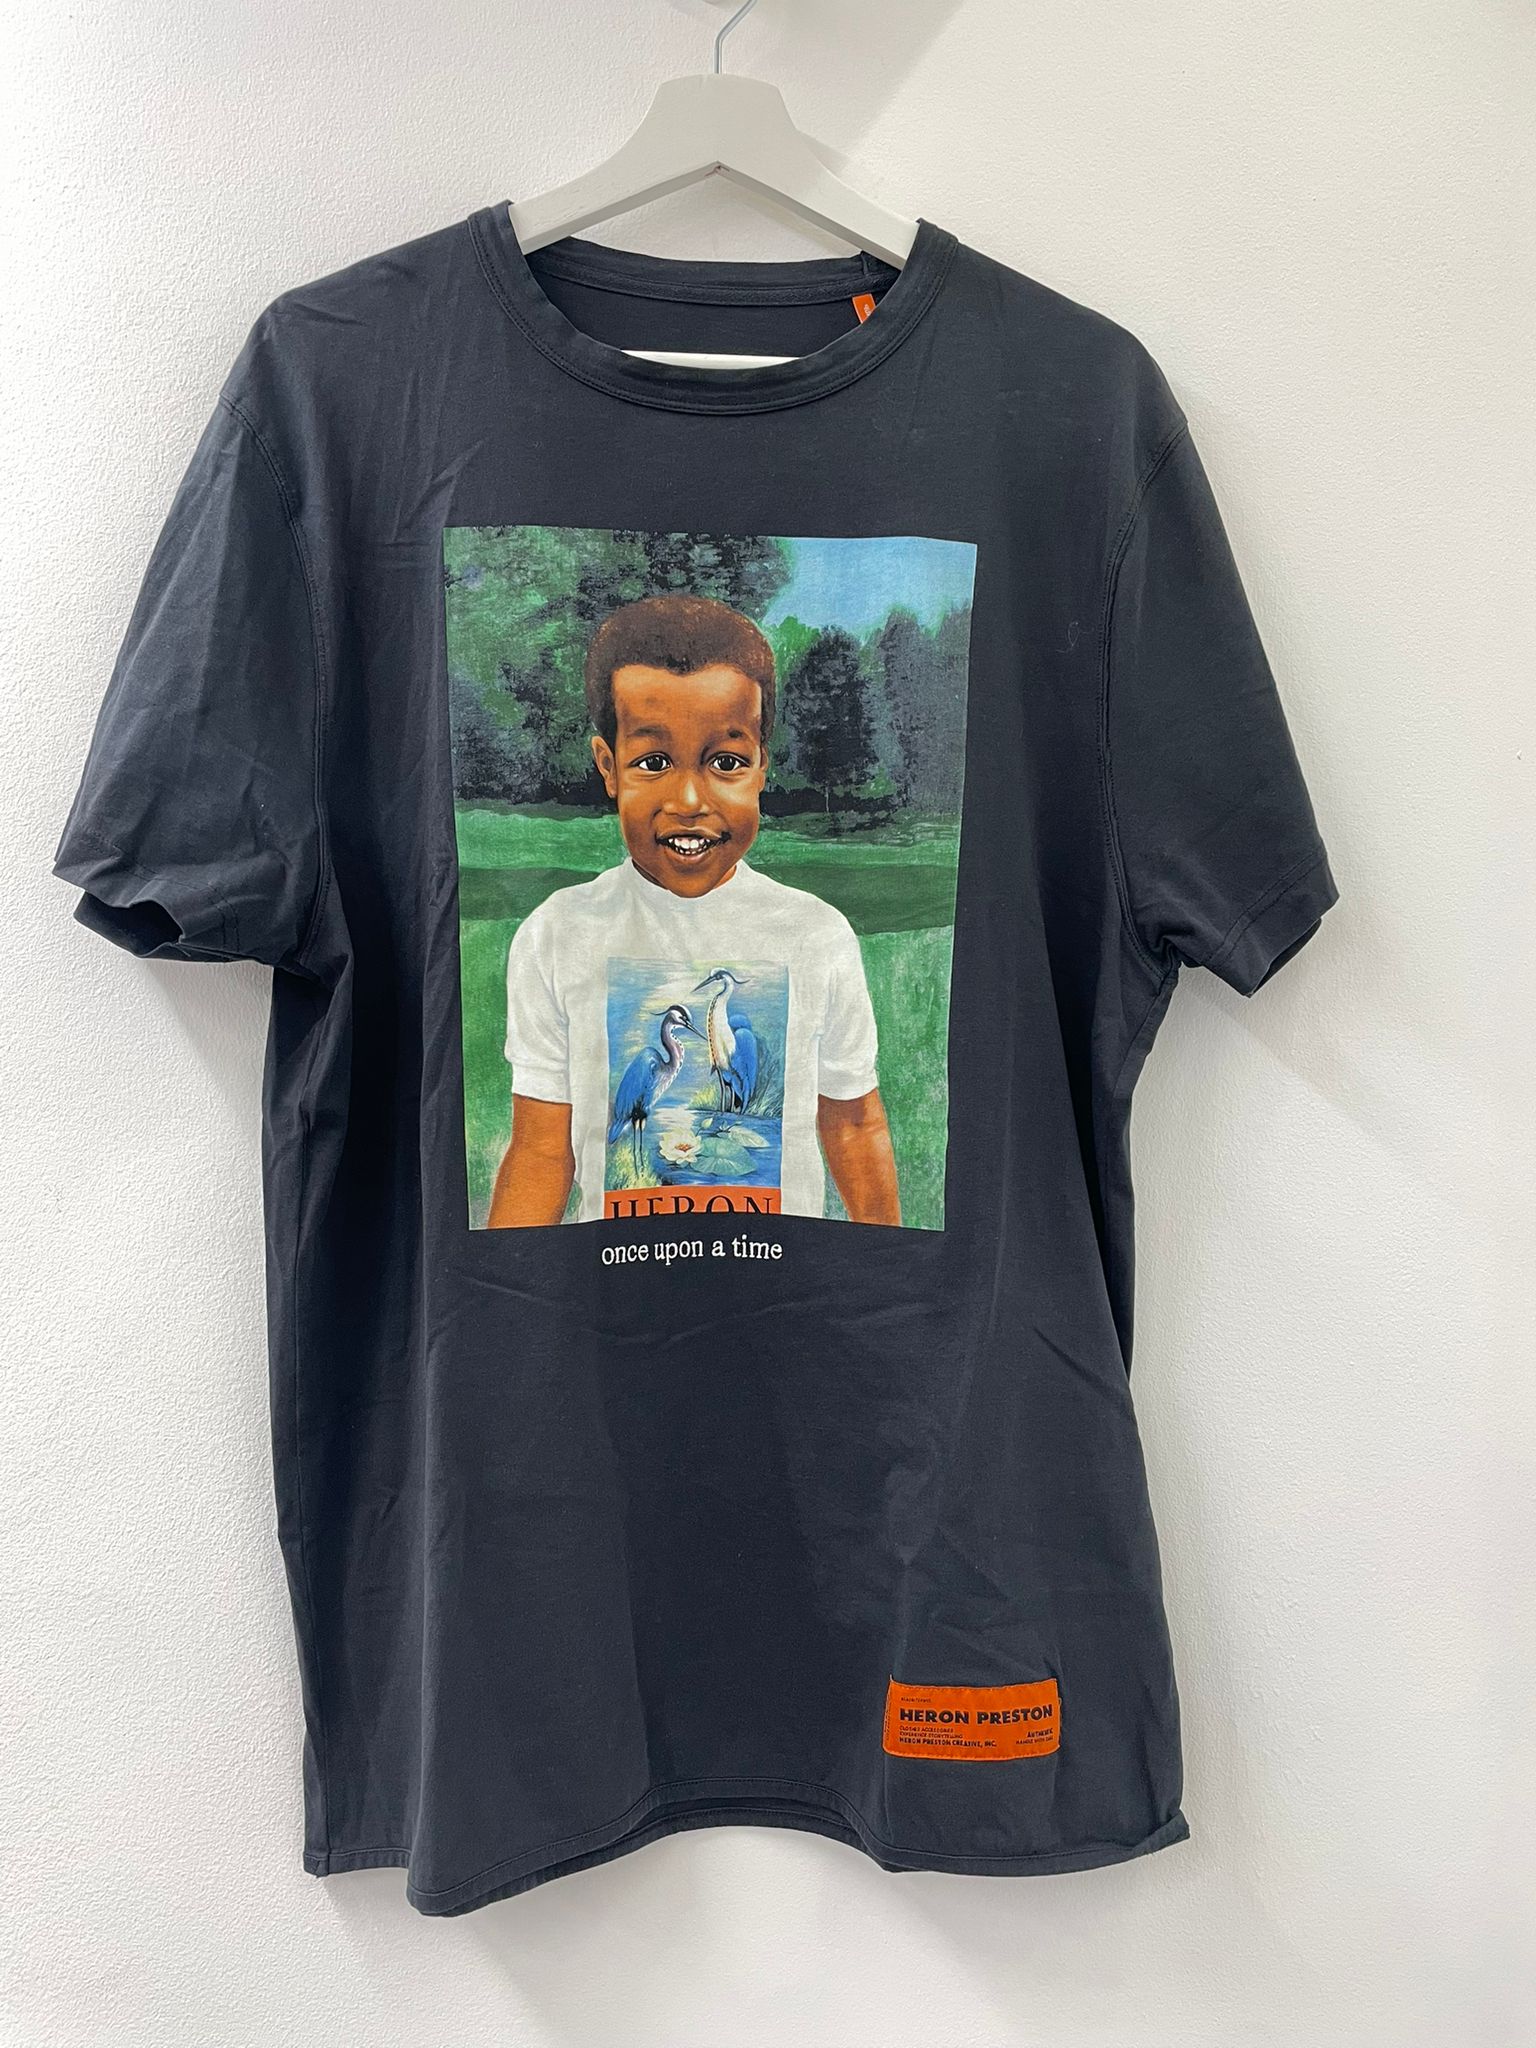 PRE LOVED - HERON PRESTON ONCE UPON A TIME T SHIRT